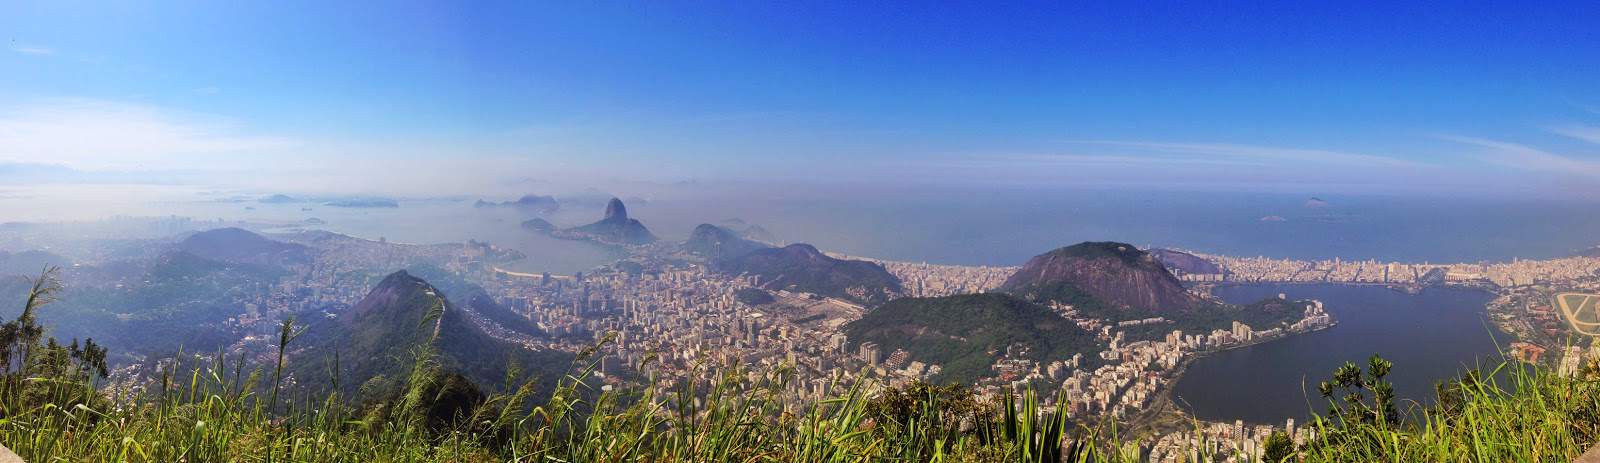 The view from Cristo Redentor at Corcovado in the Tijuca Forest National Park, Rio de Janeiro, Brazil